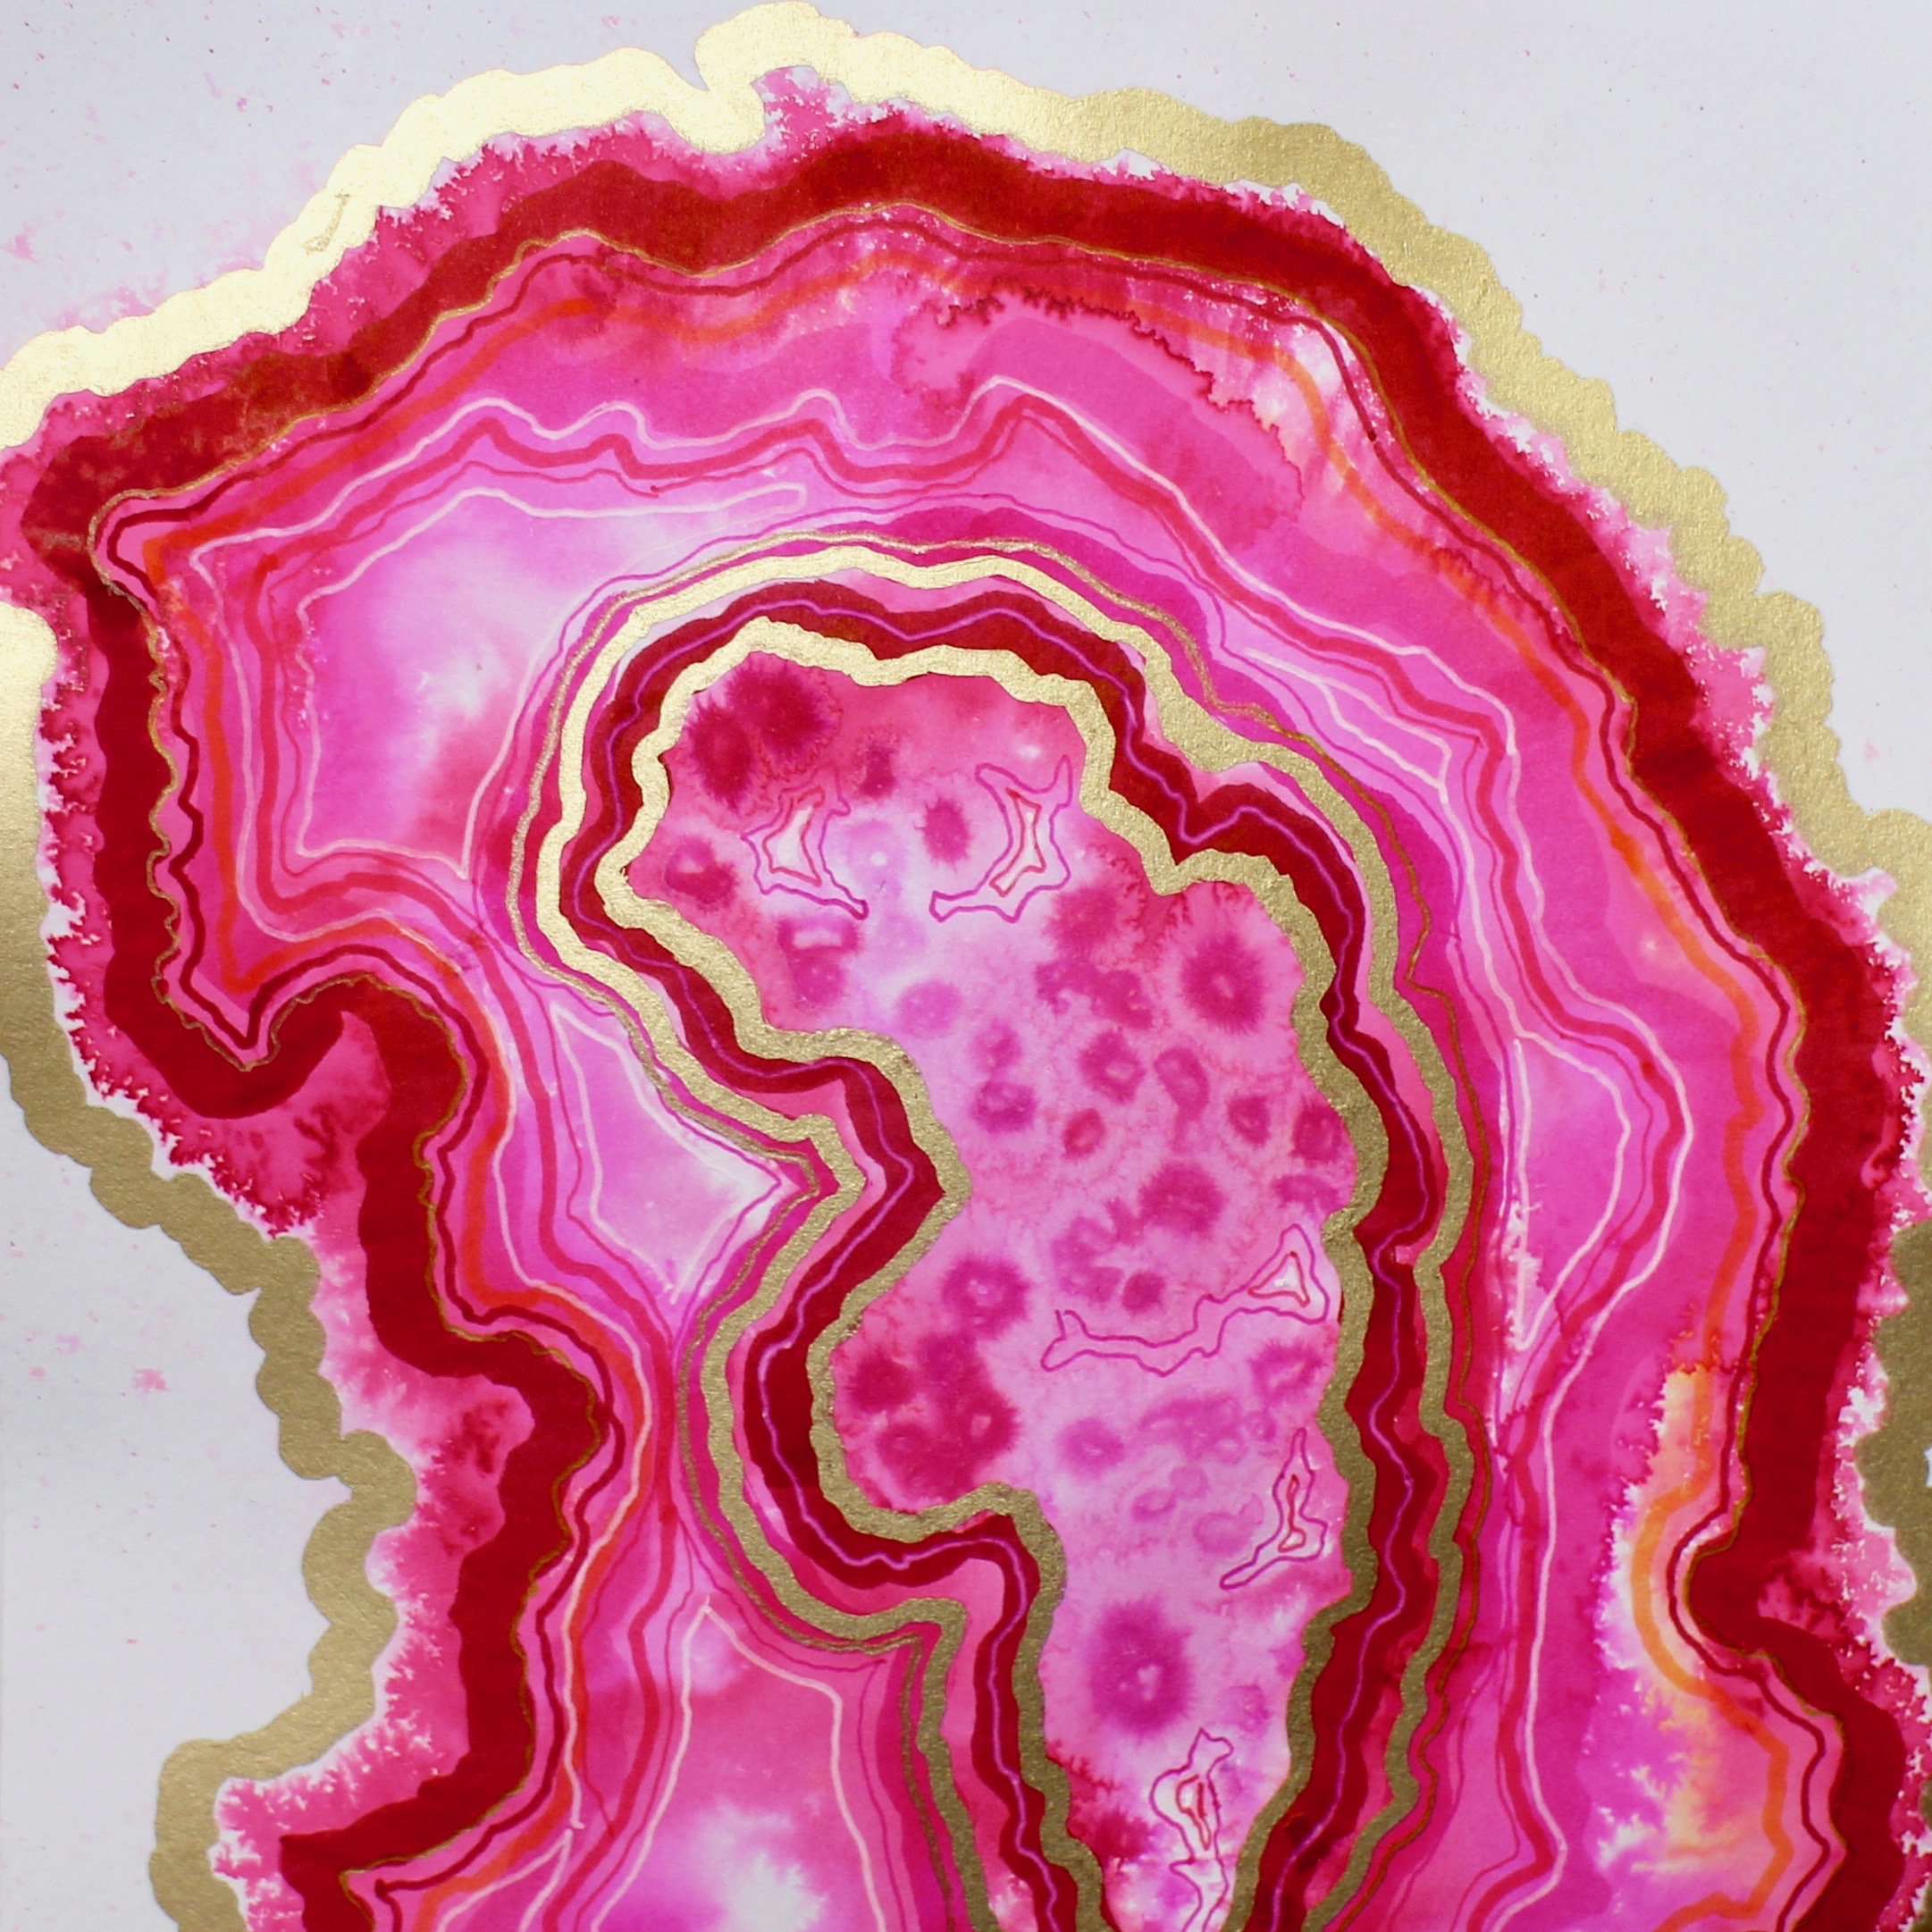 Draw a Pink Agate Slice for National Pink Day - Tombow USA Blog